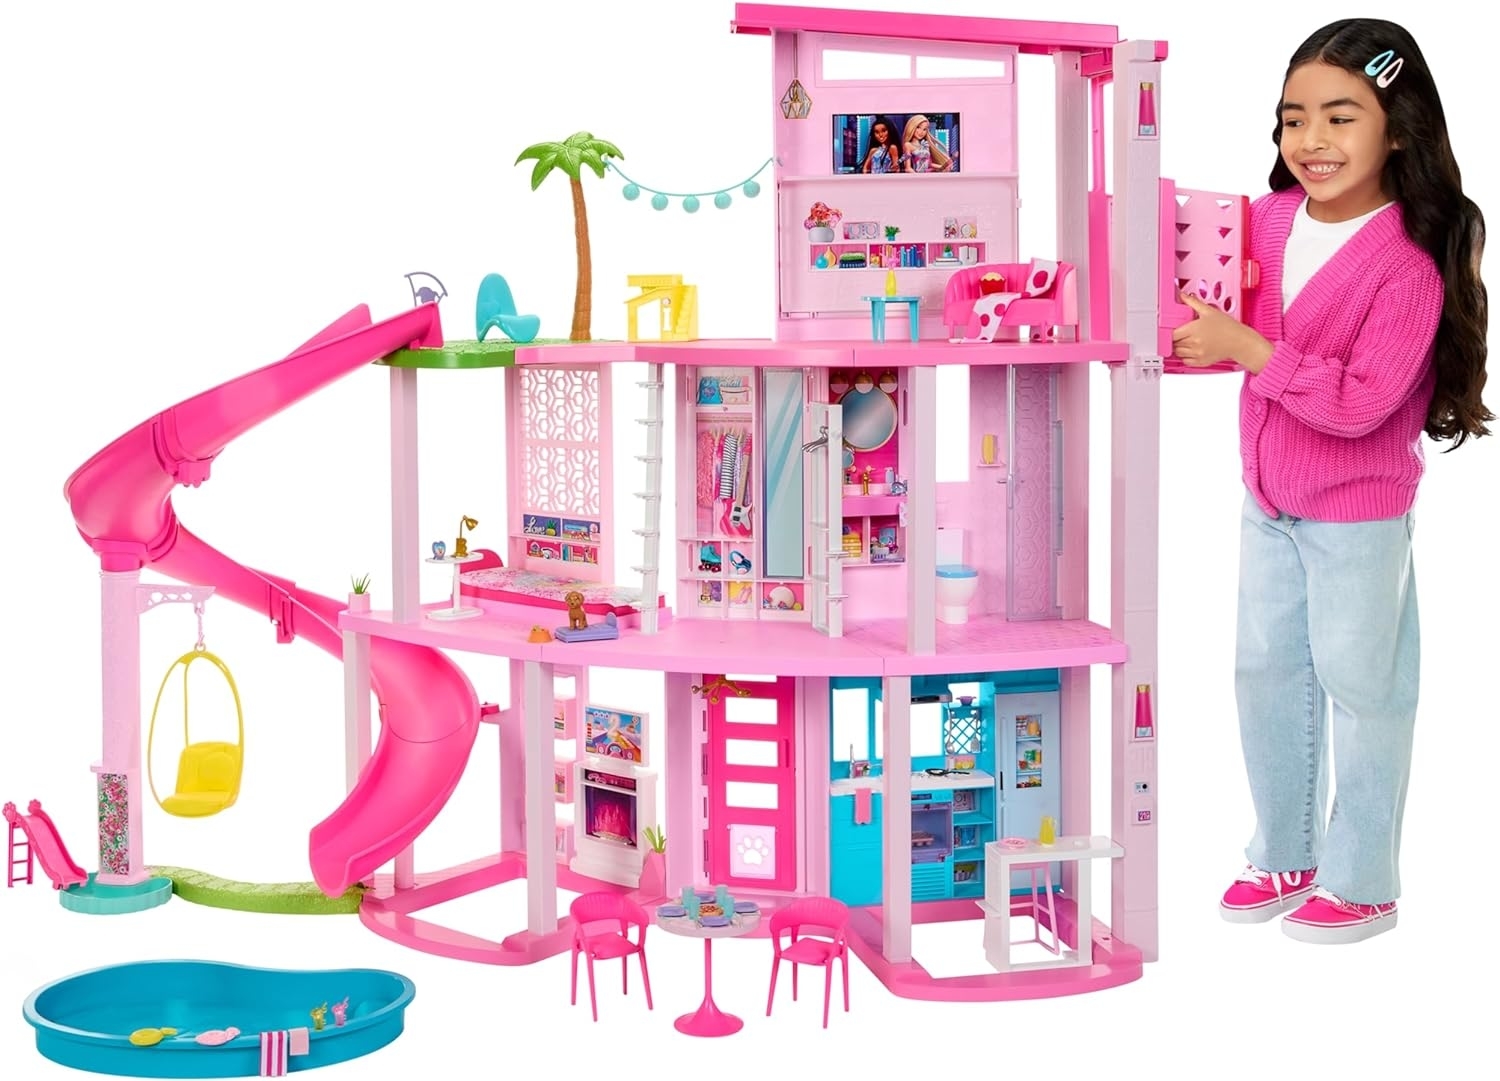 child standing next to three story pink Barbie dollhouse